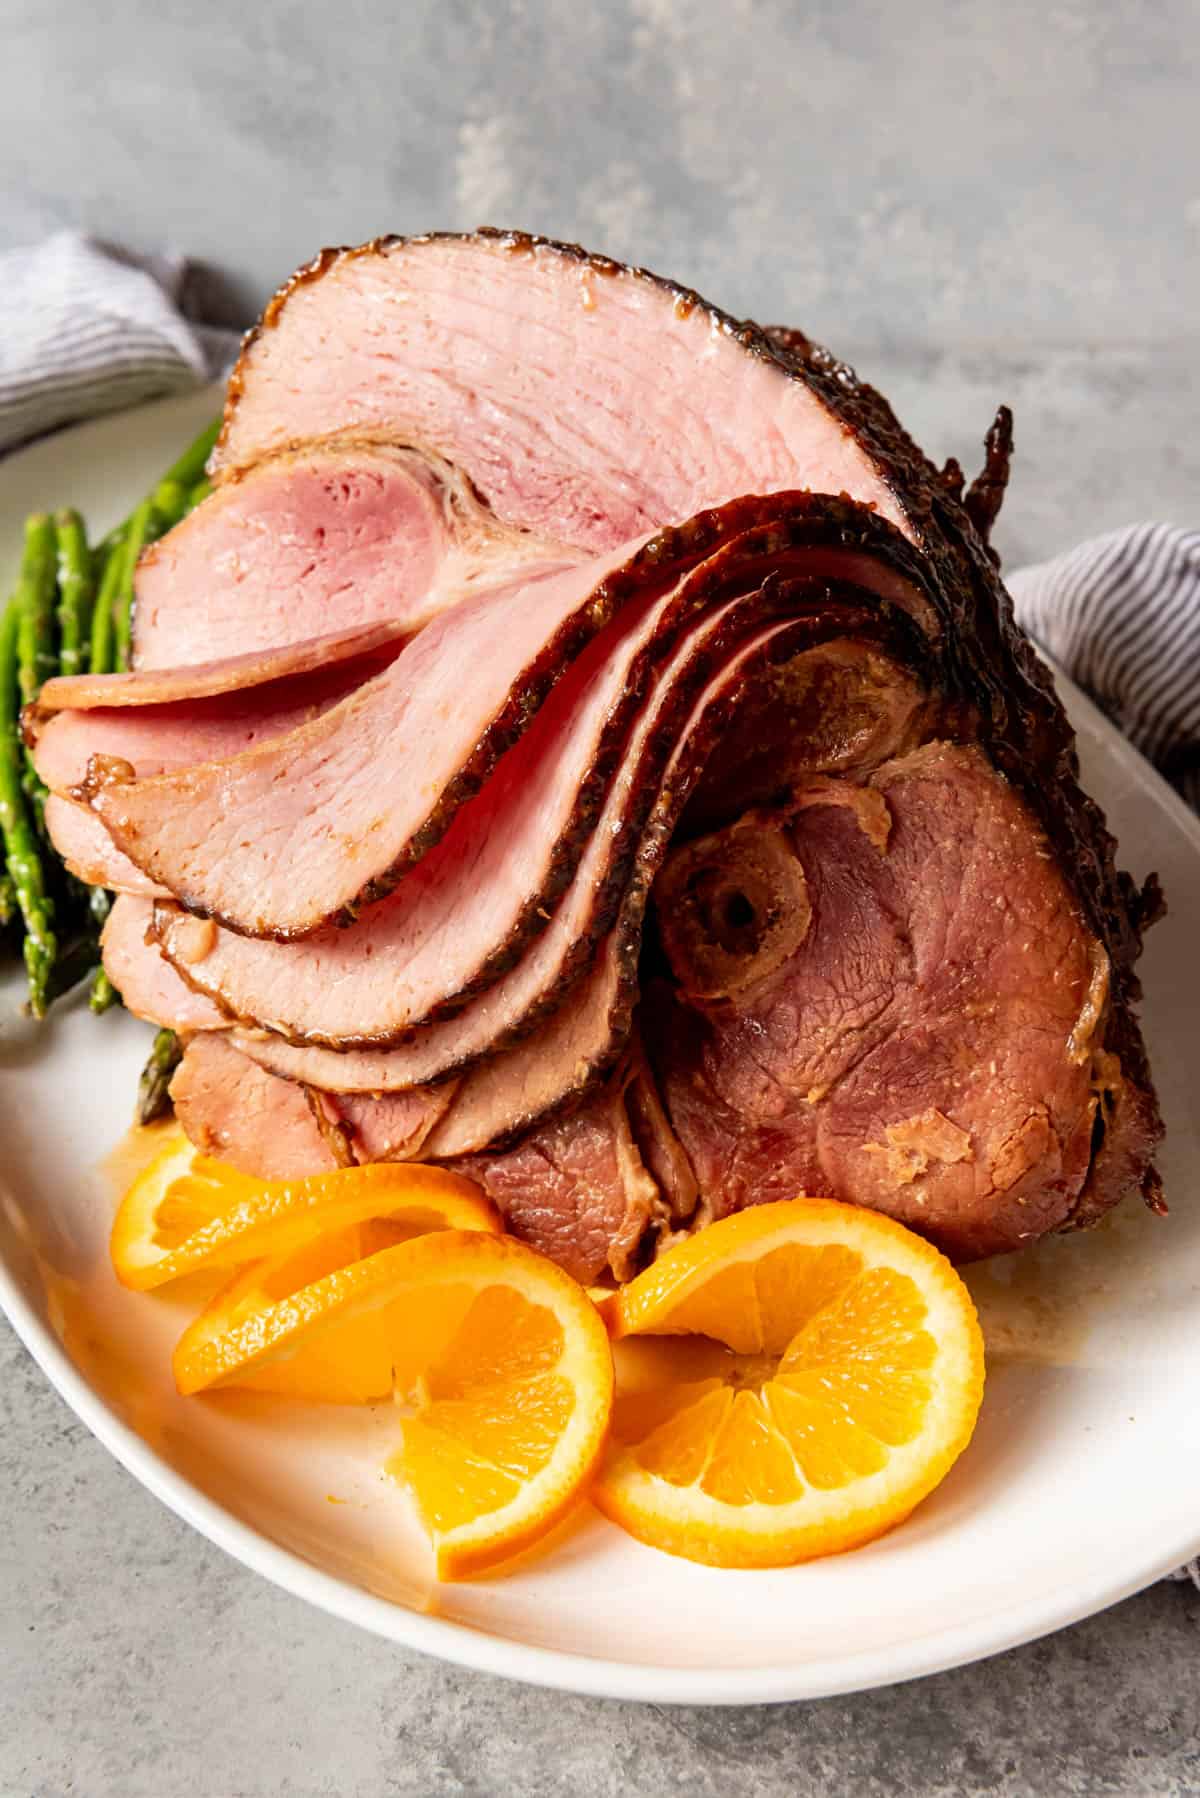 An image of a large sliced ham on a white platter with orange slices.